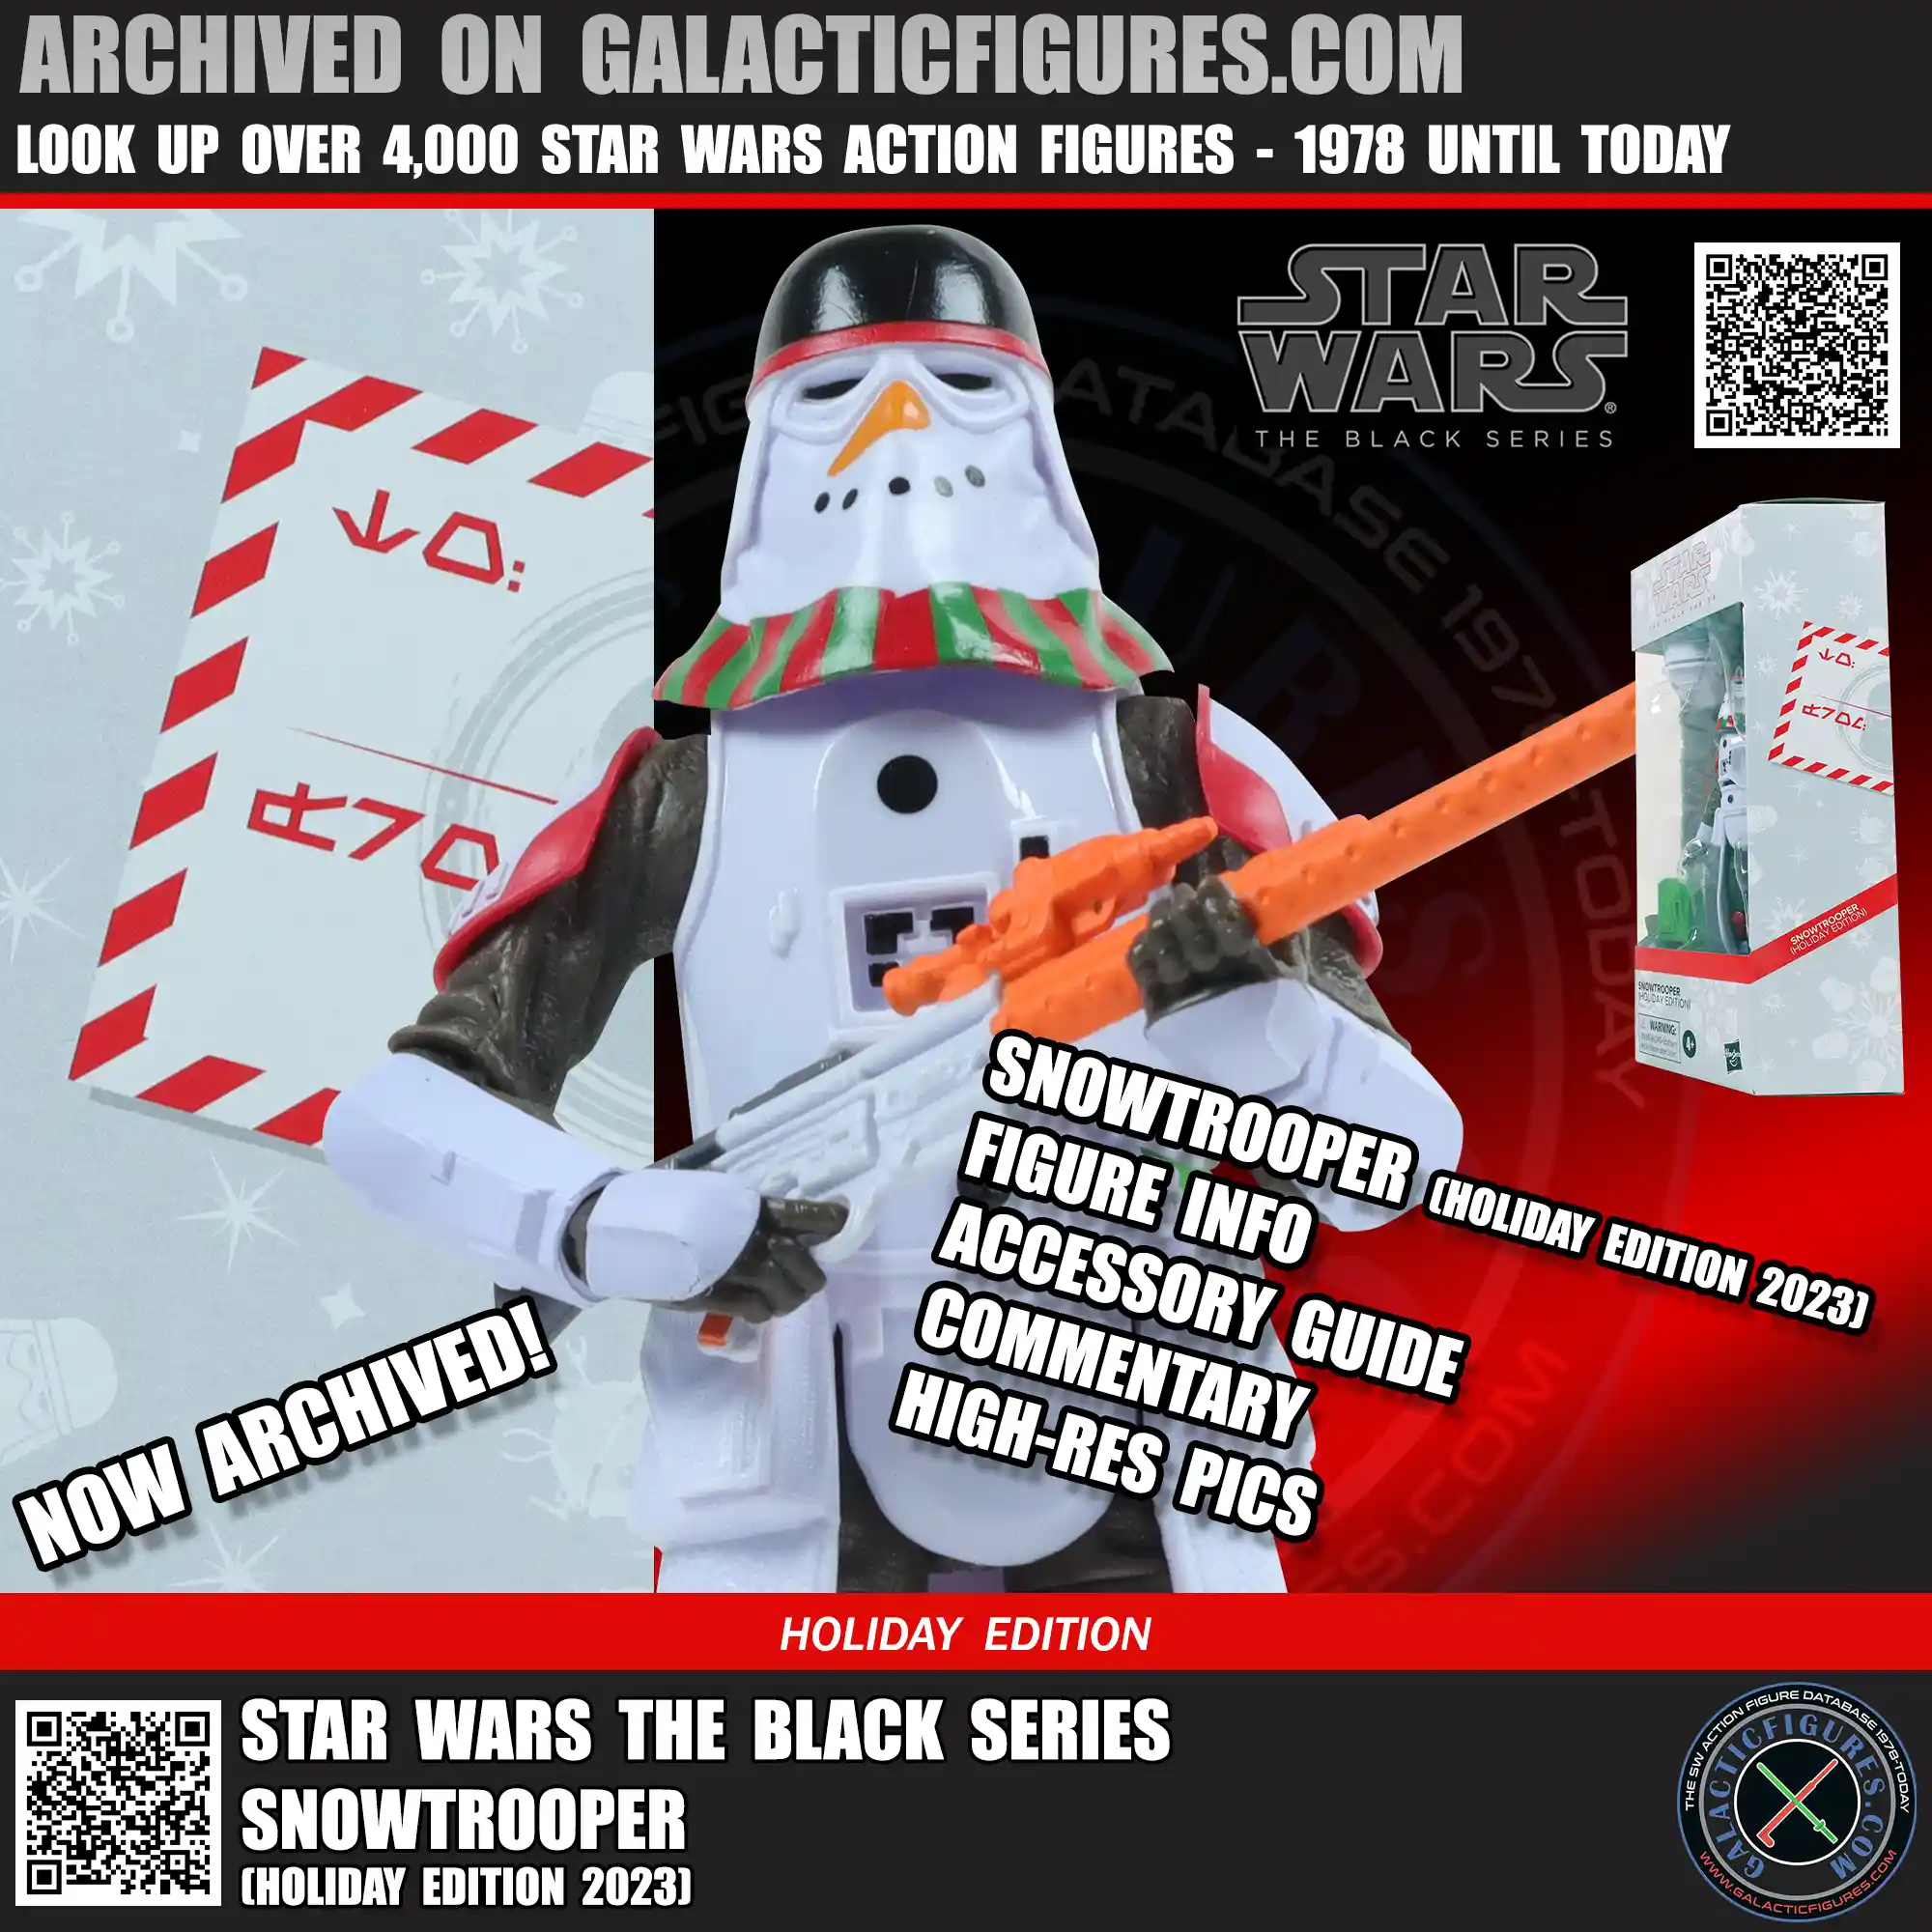 Black Series Snowtrooper Holiday Edition 2023 Archived